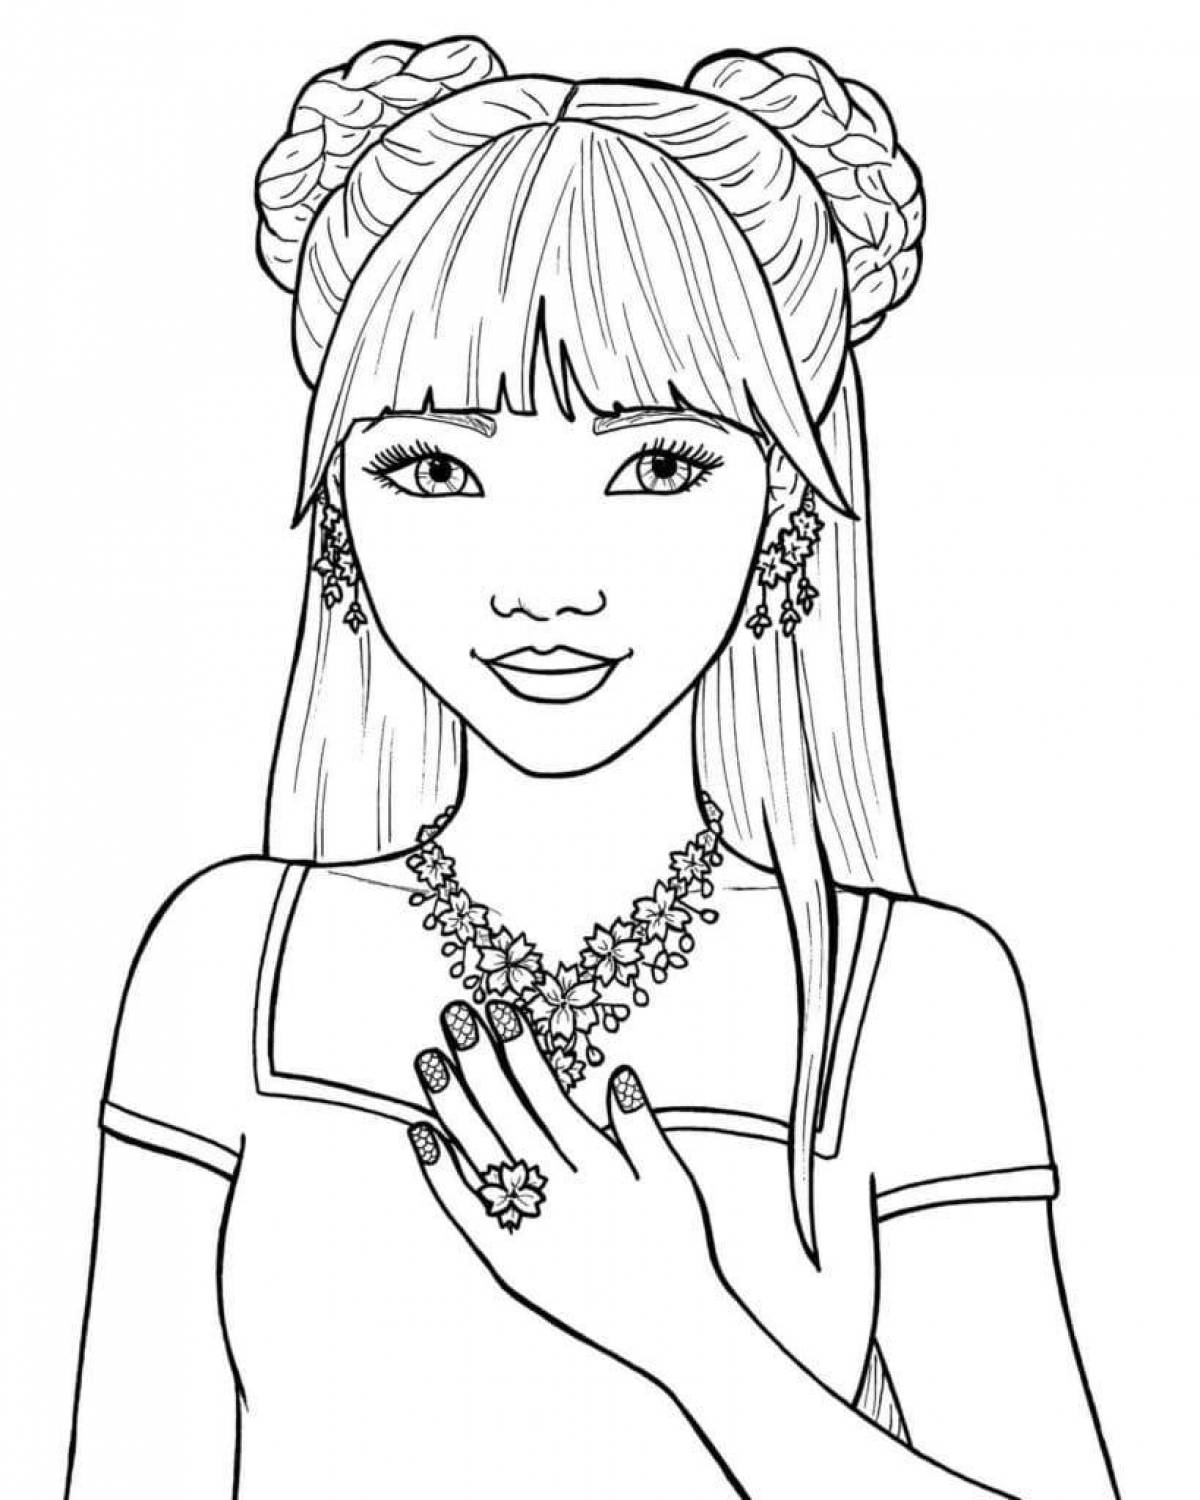 Exquisite coloring pages for girls